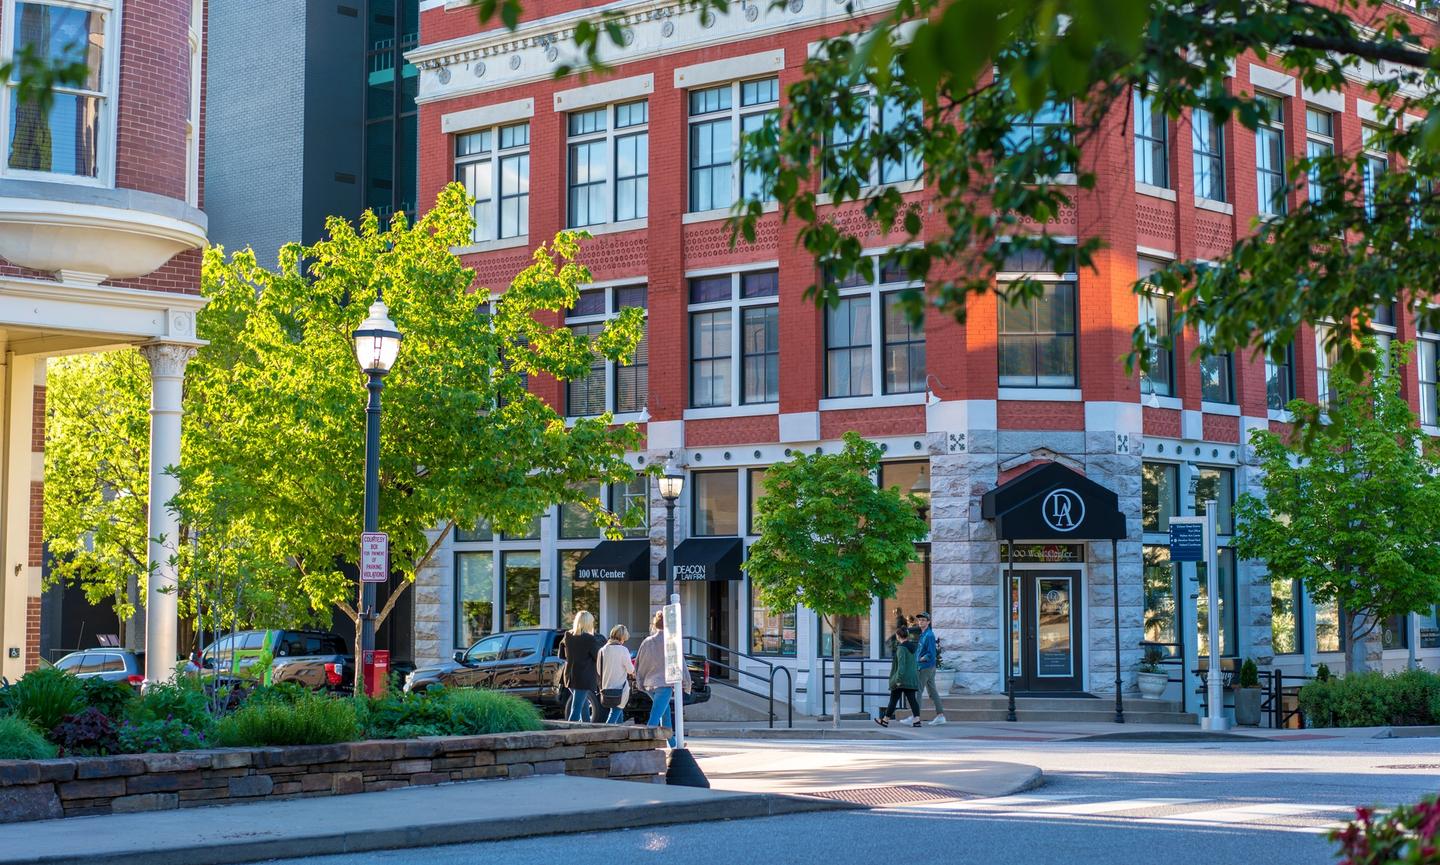 Fayetteville’s Historic Downtown Square features a lively mix of restaurants, live music venues, galleries, and public art installations.